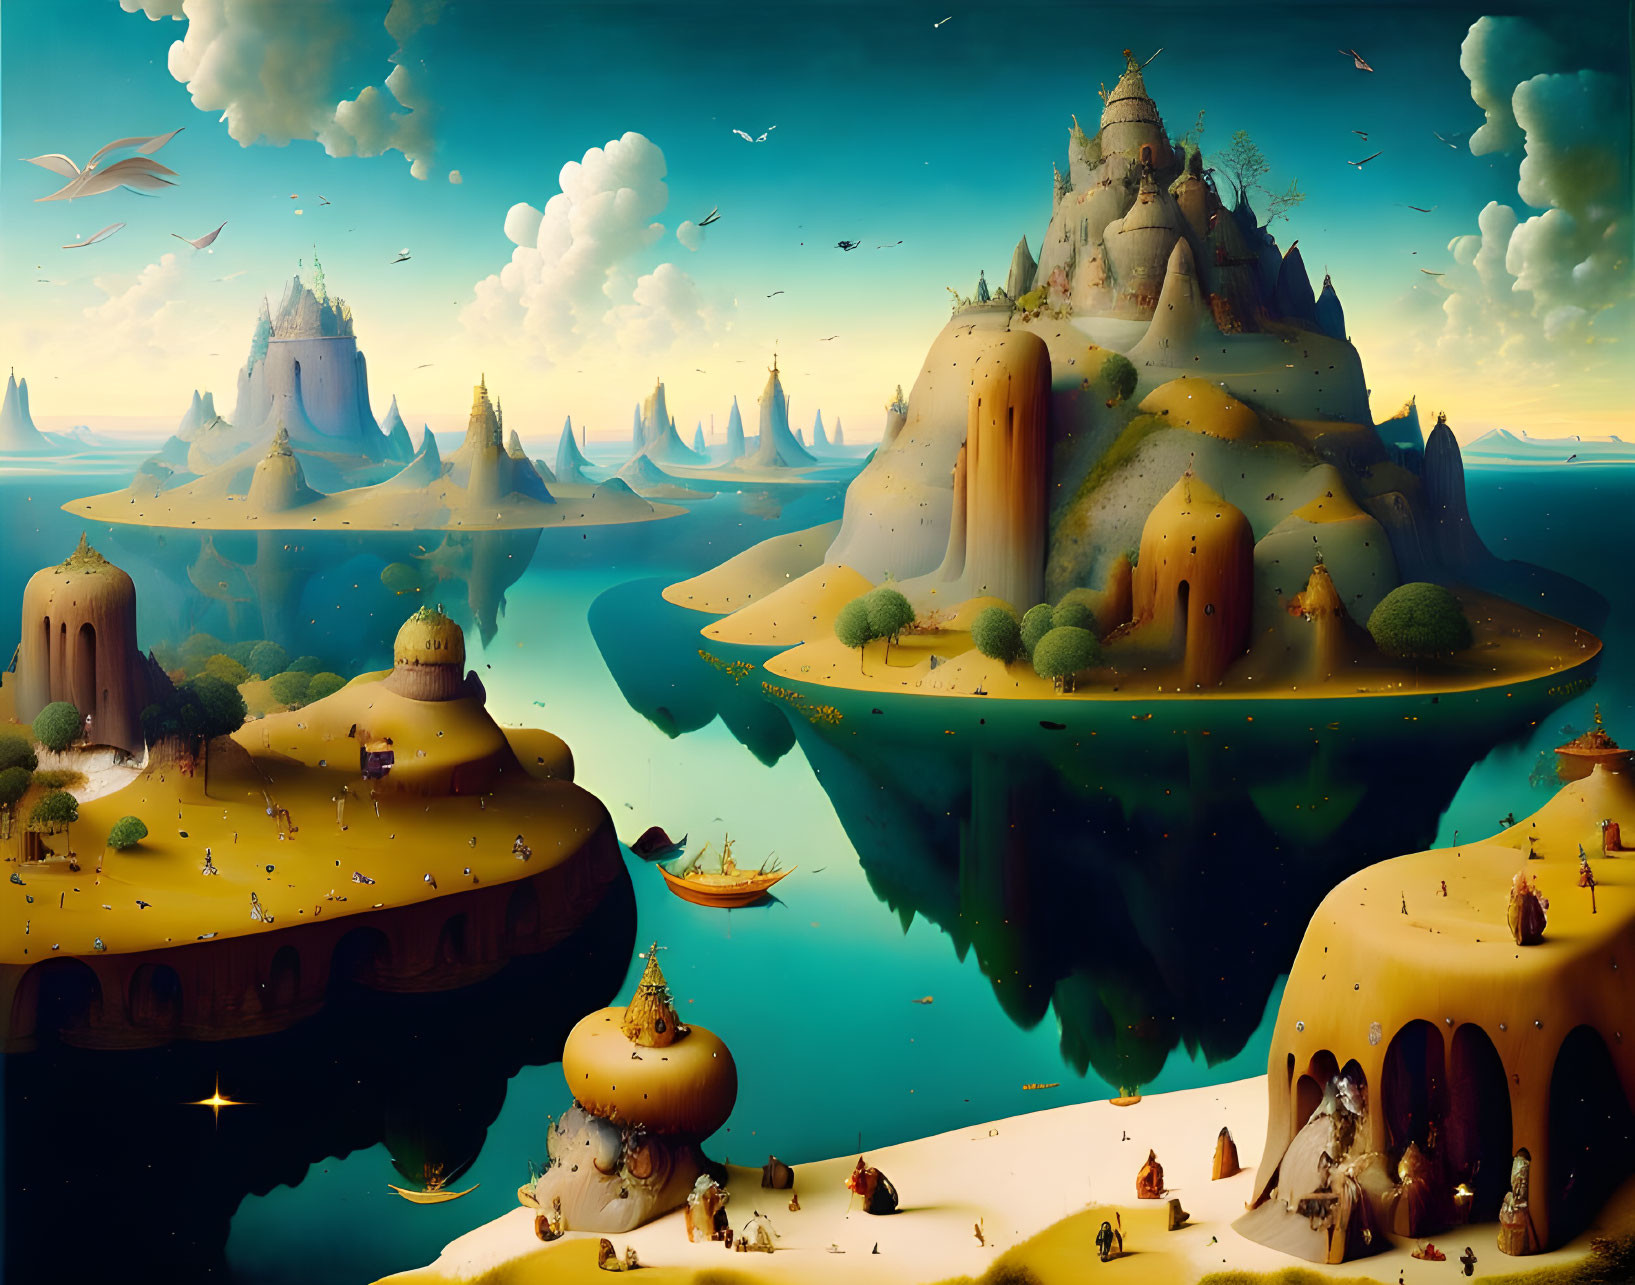 Surreal landscape with floating islands and calm waters